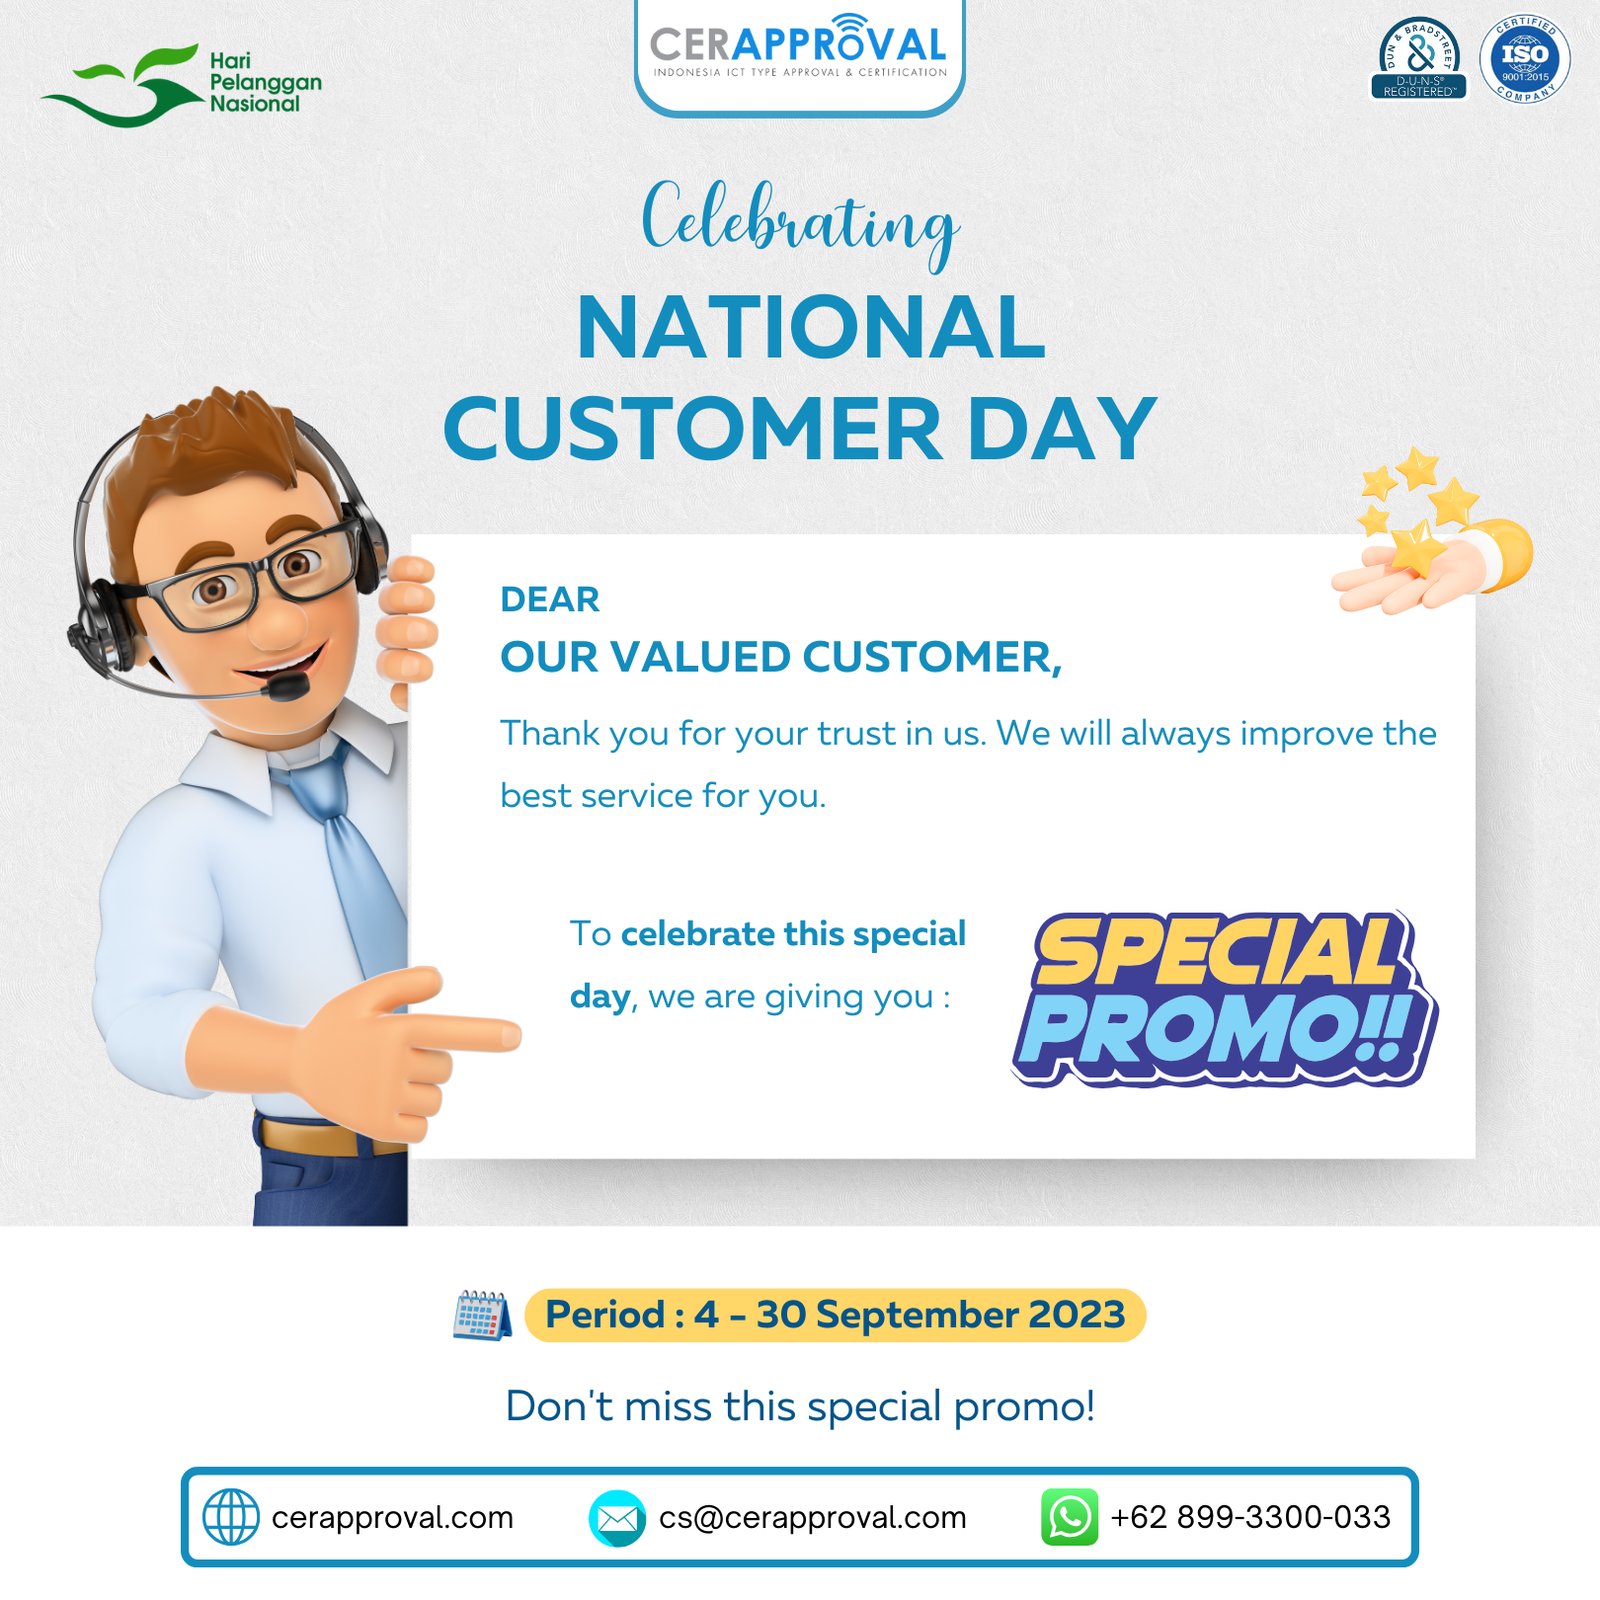 National Customer Day Promo, Don’t Miss It!